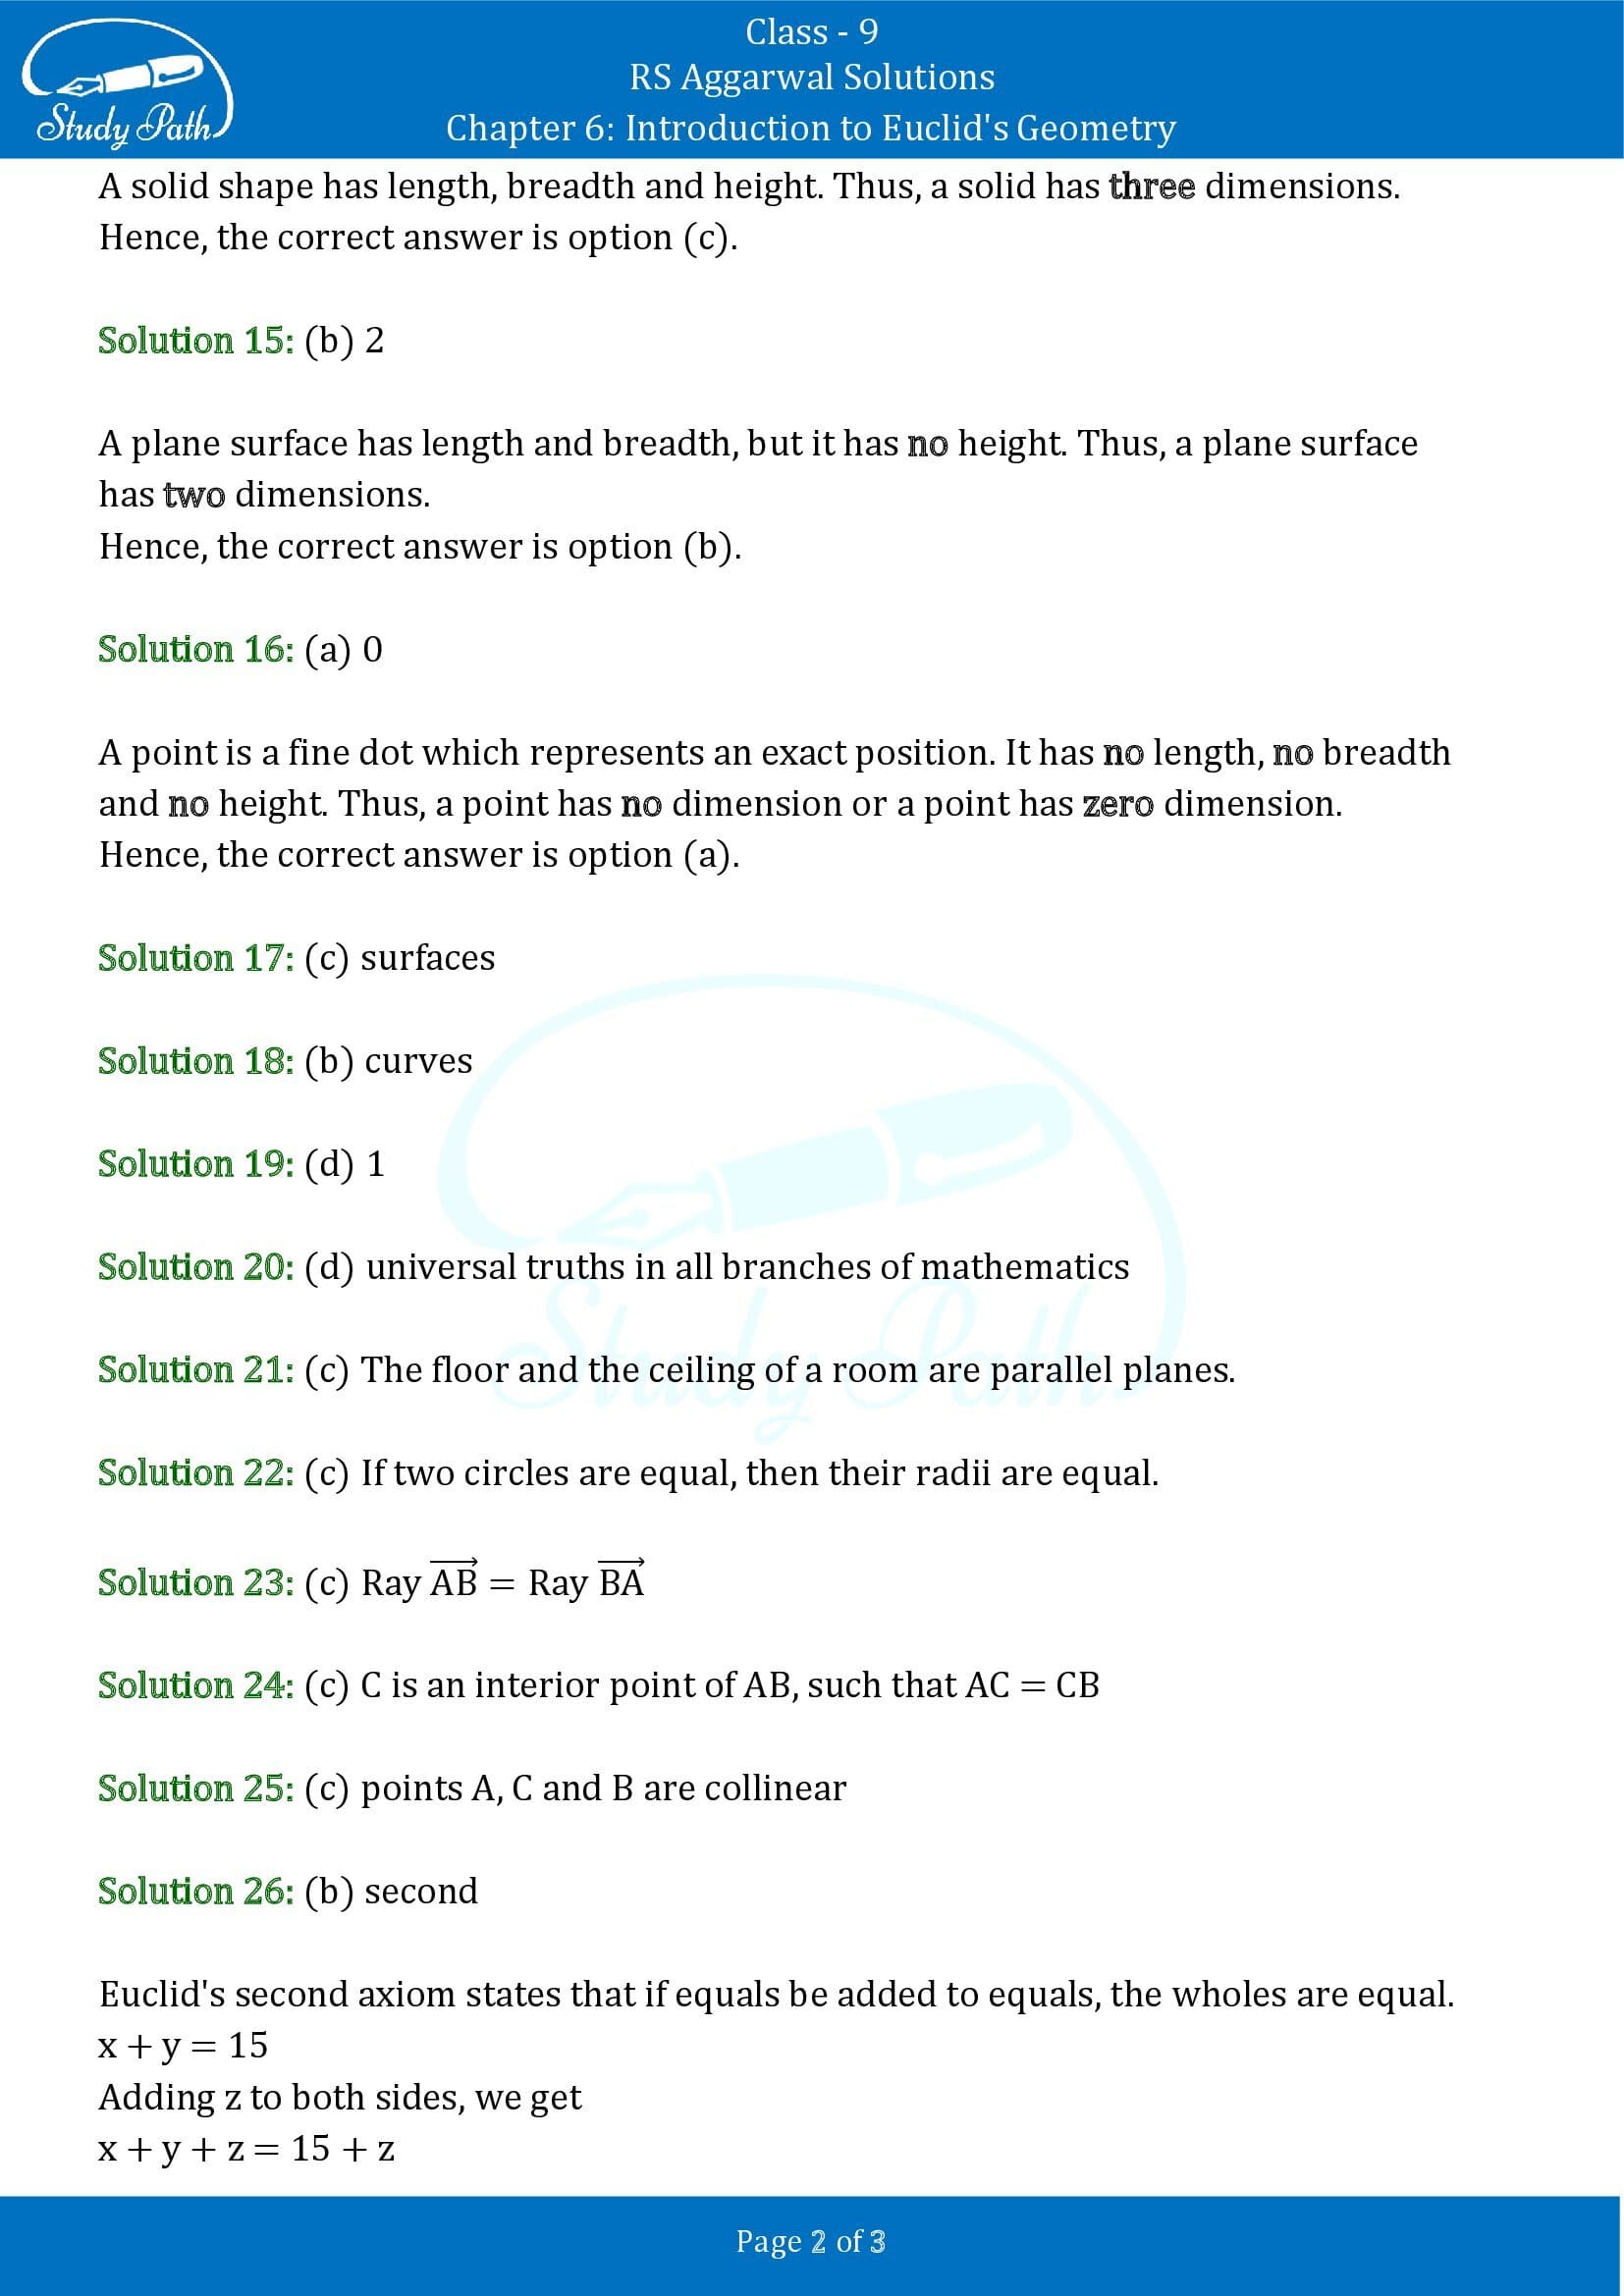 RS Aggarwal Solutions Class 9 Chapter 6 Introduction to Euclids Geometry Multiple Choice Questions MCQs 00002